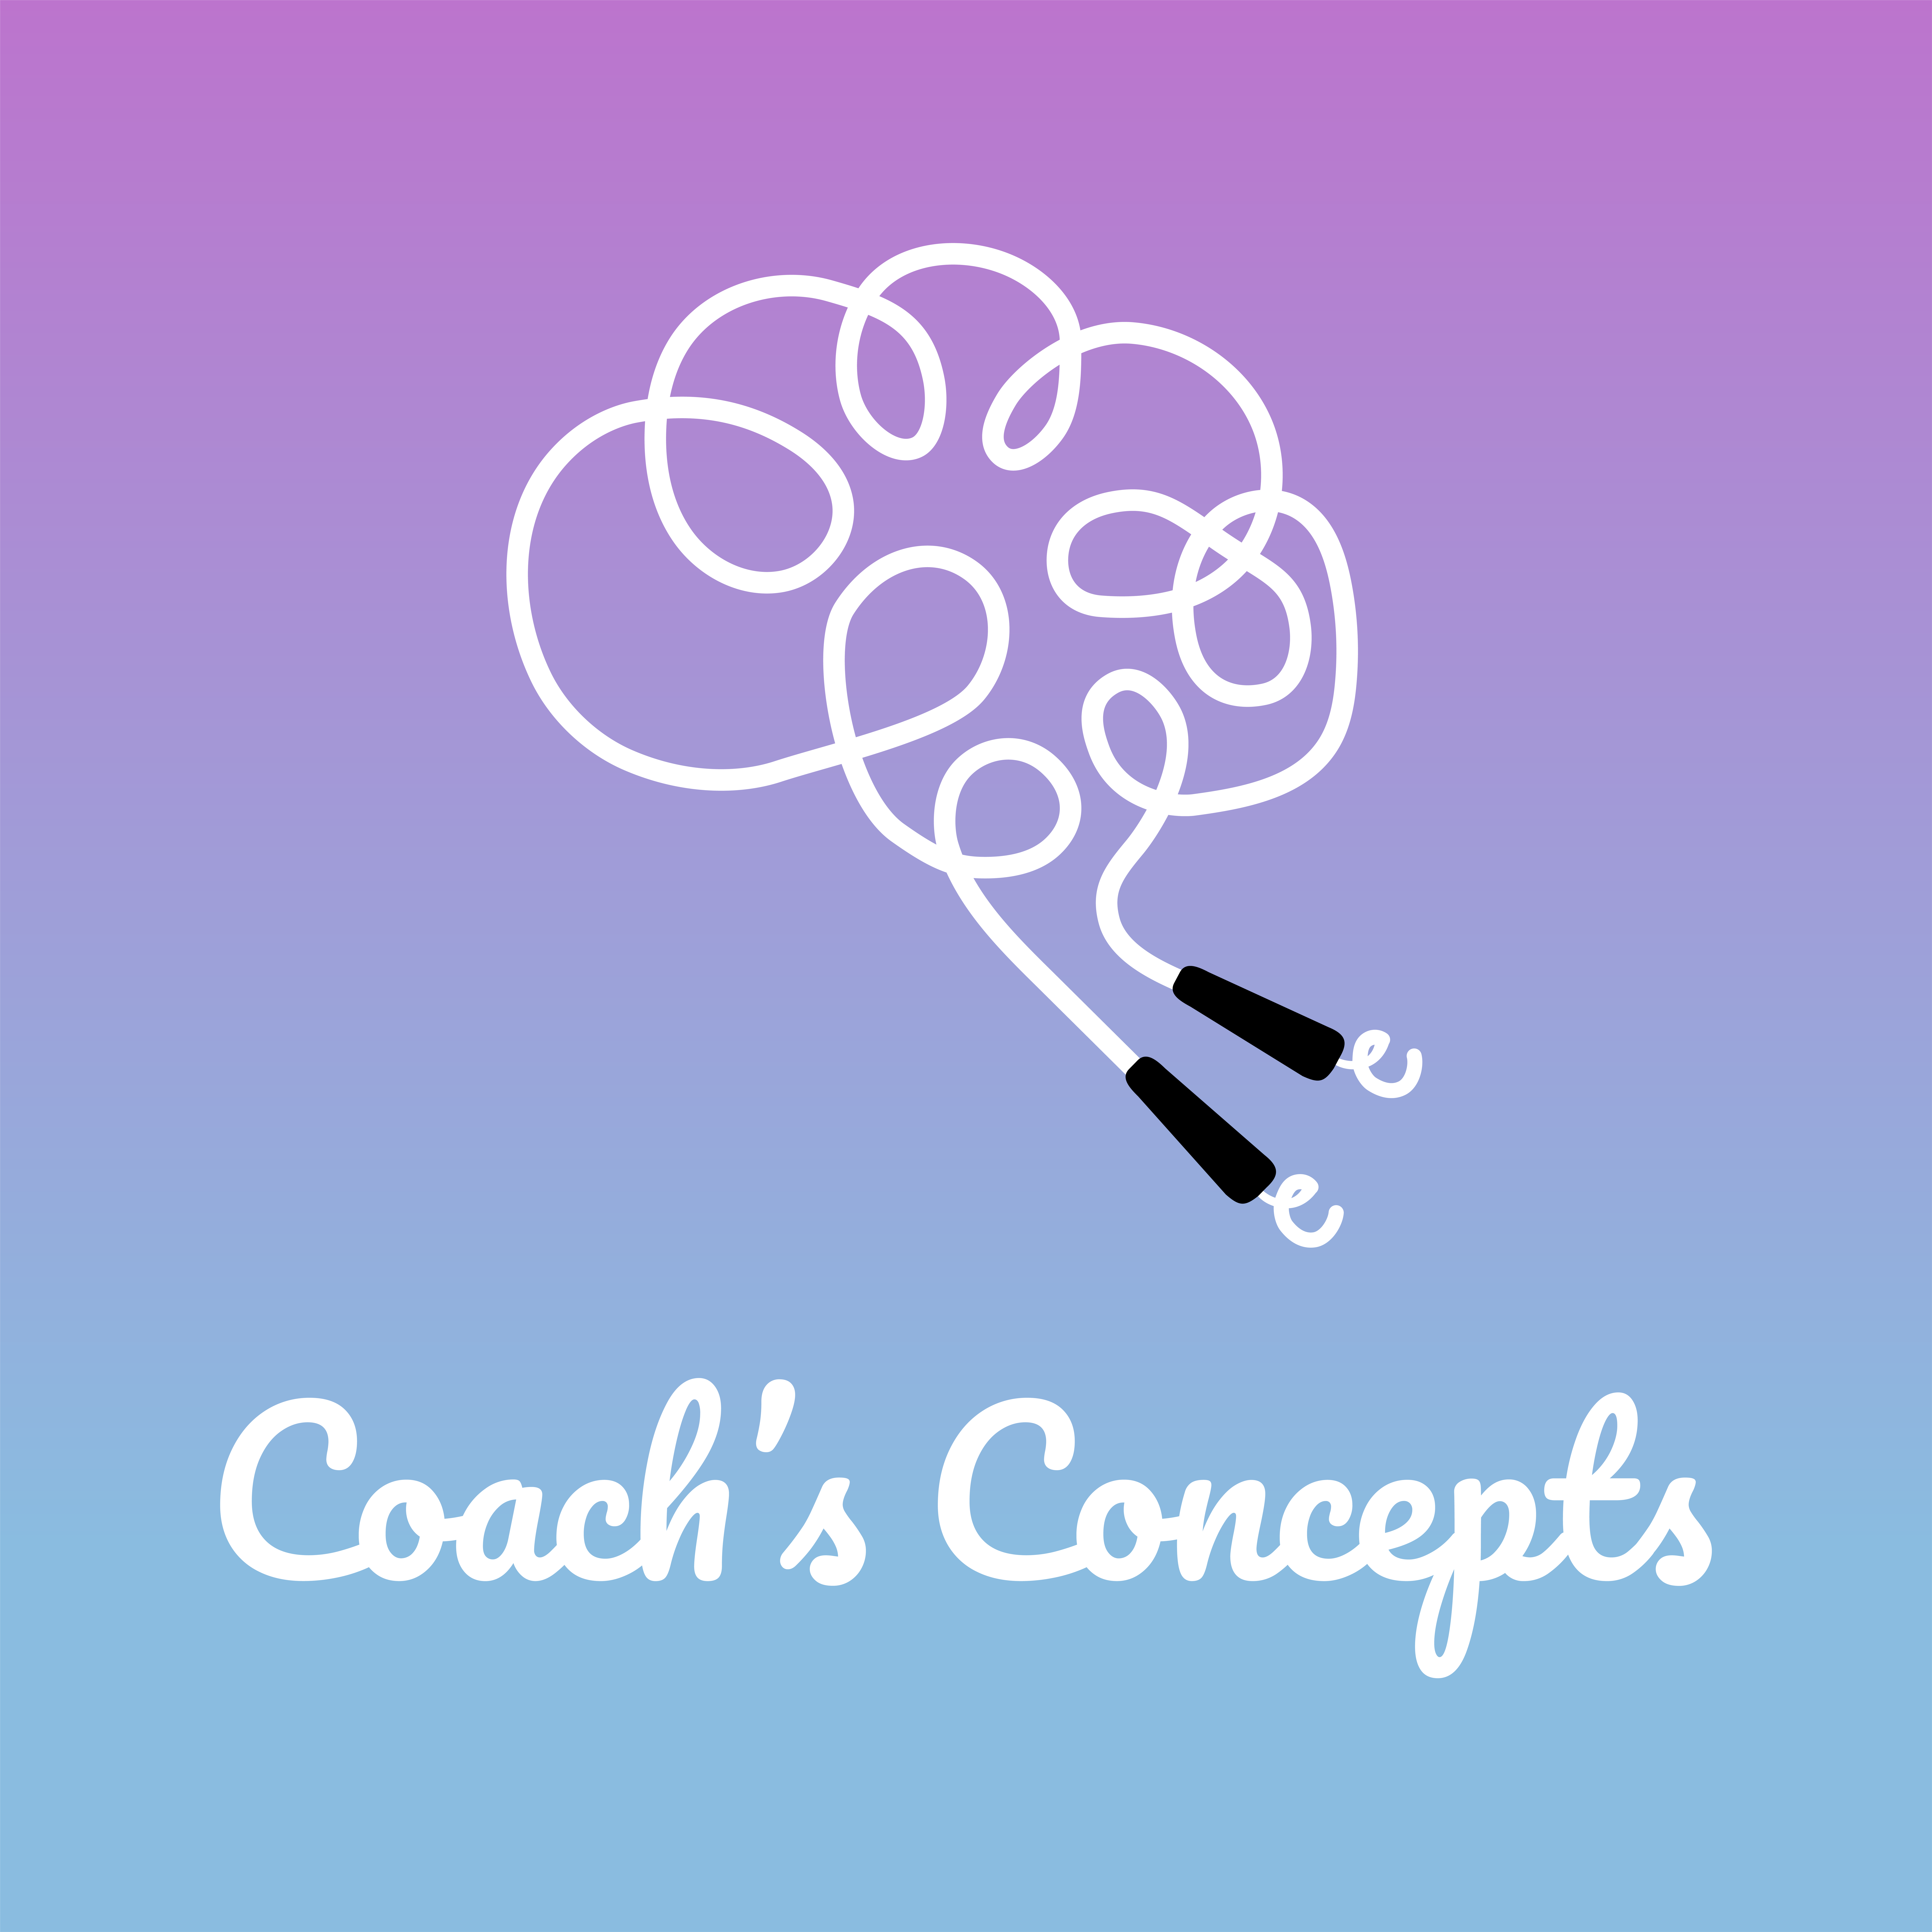 Coach's Concepts podcast cover